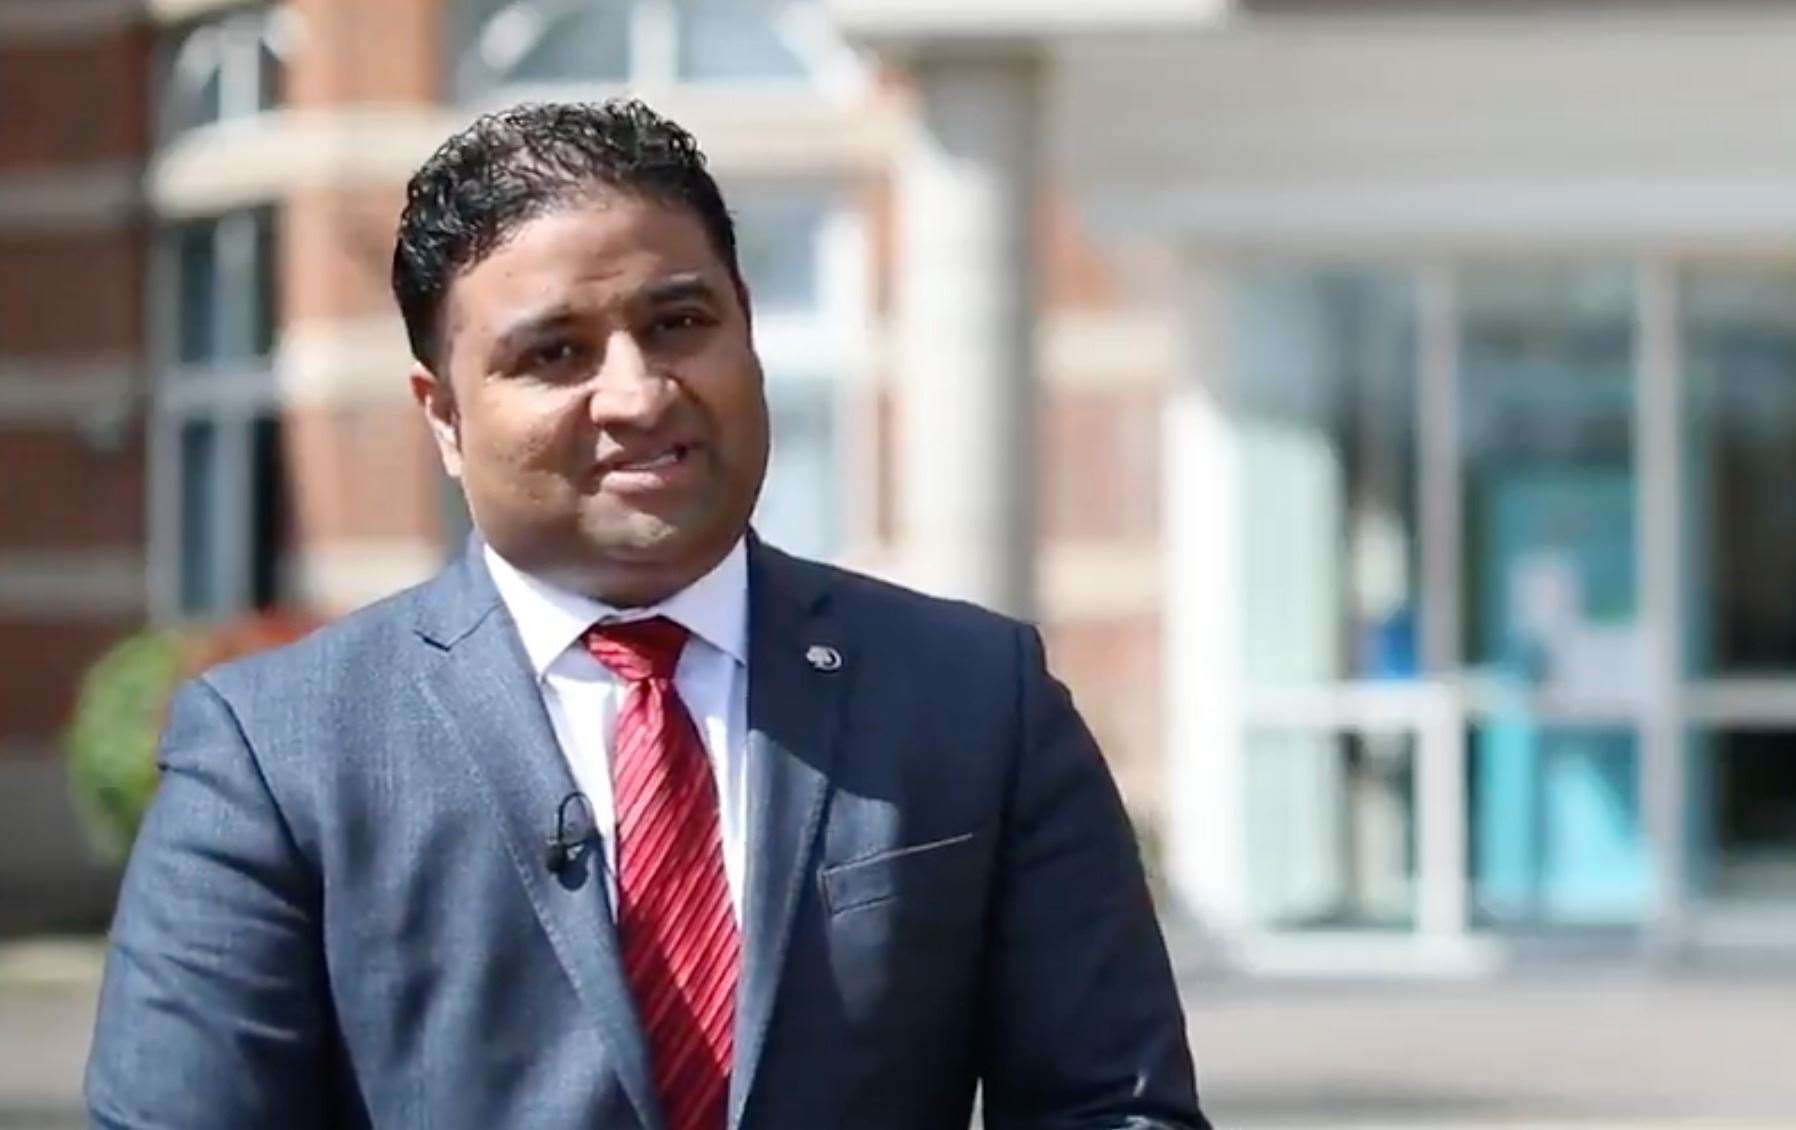 Karthick Srinivasan, general manager at the DoubleTree Hilton Hotel at Crossways Business Park. Picture: Dartford Borough Council